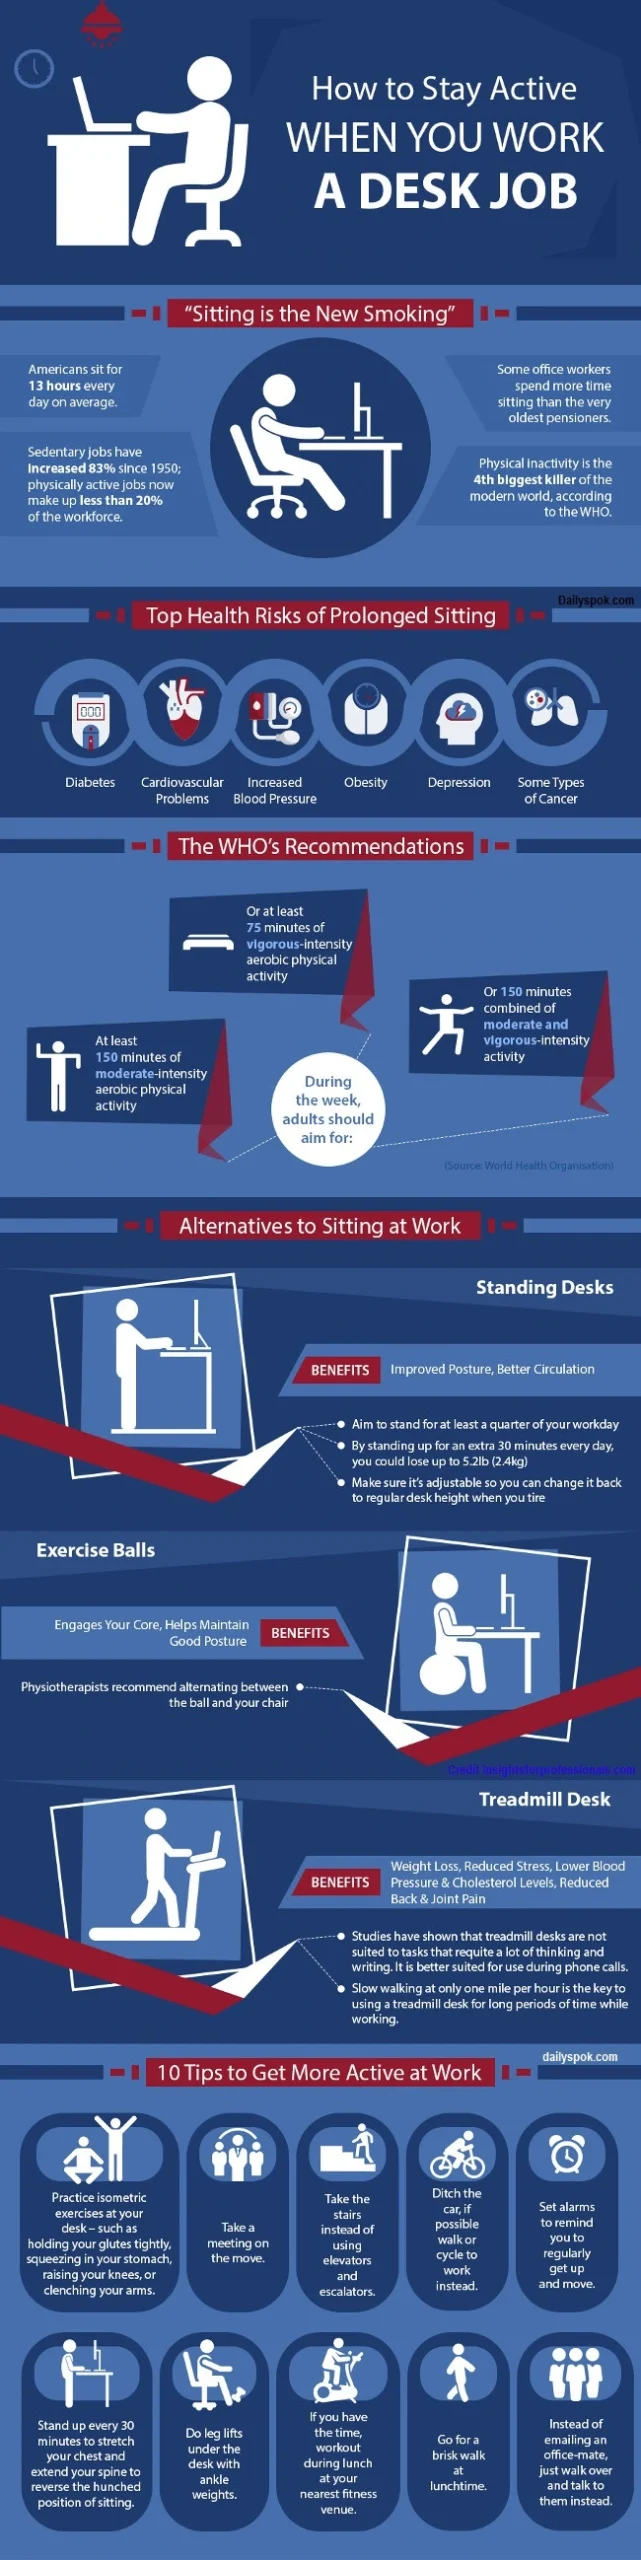 How Desk Job Professionals Stay Healthy and Active without Going to Gym